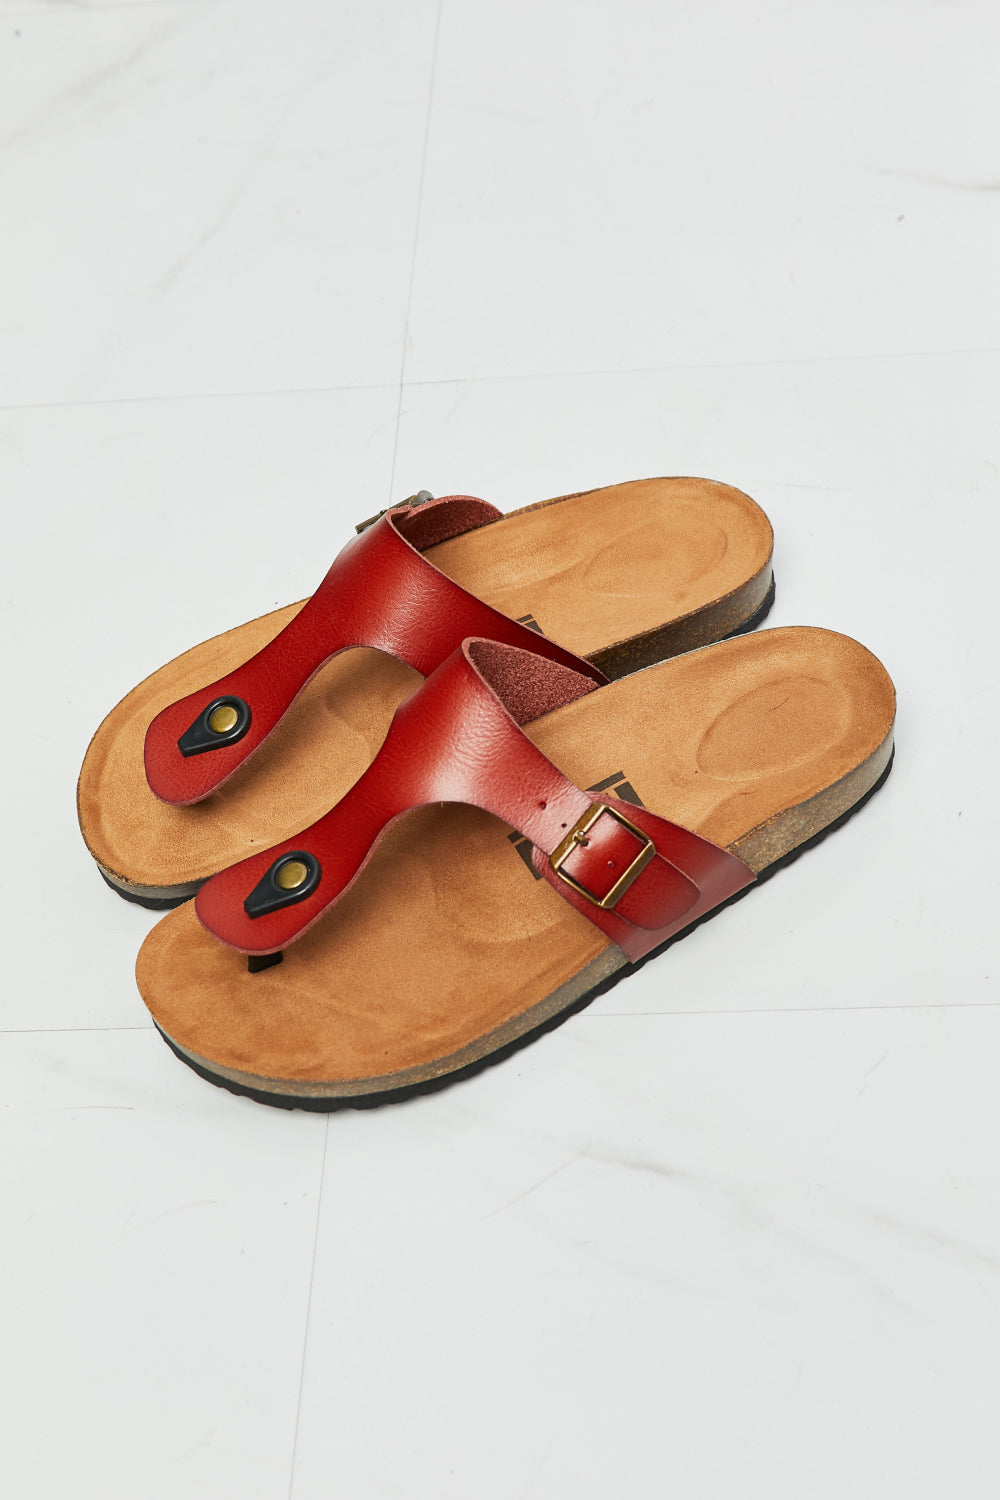 MMShoes Drift Away T-Strap Flip-Flop in Red Sandals